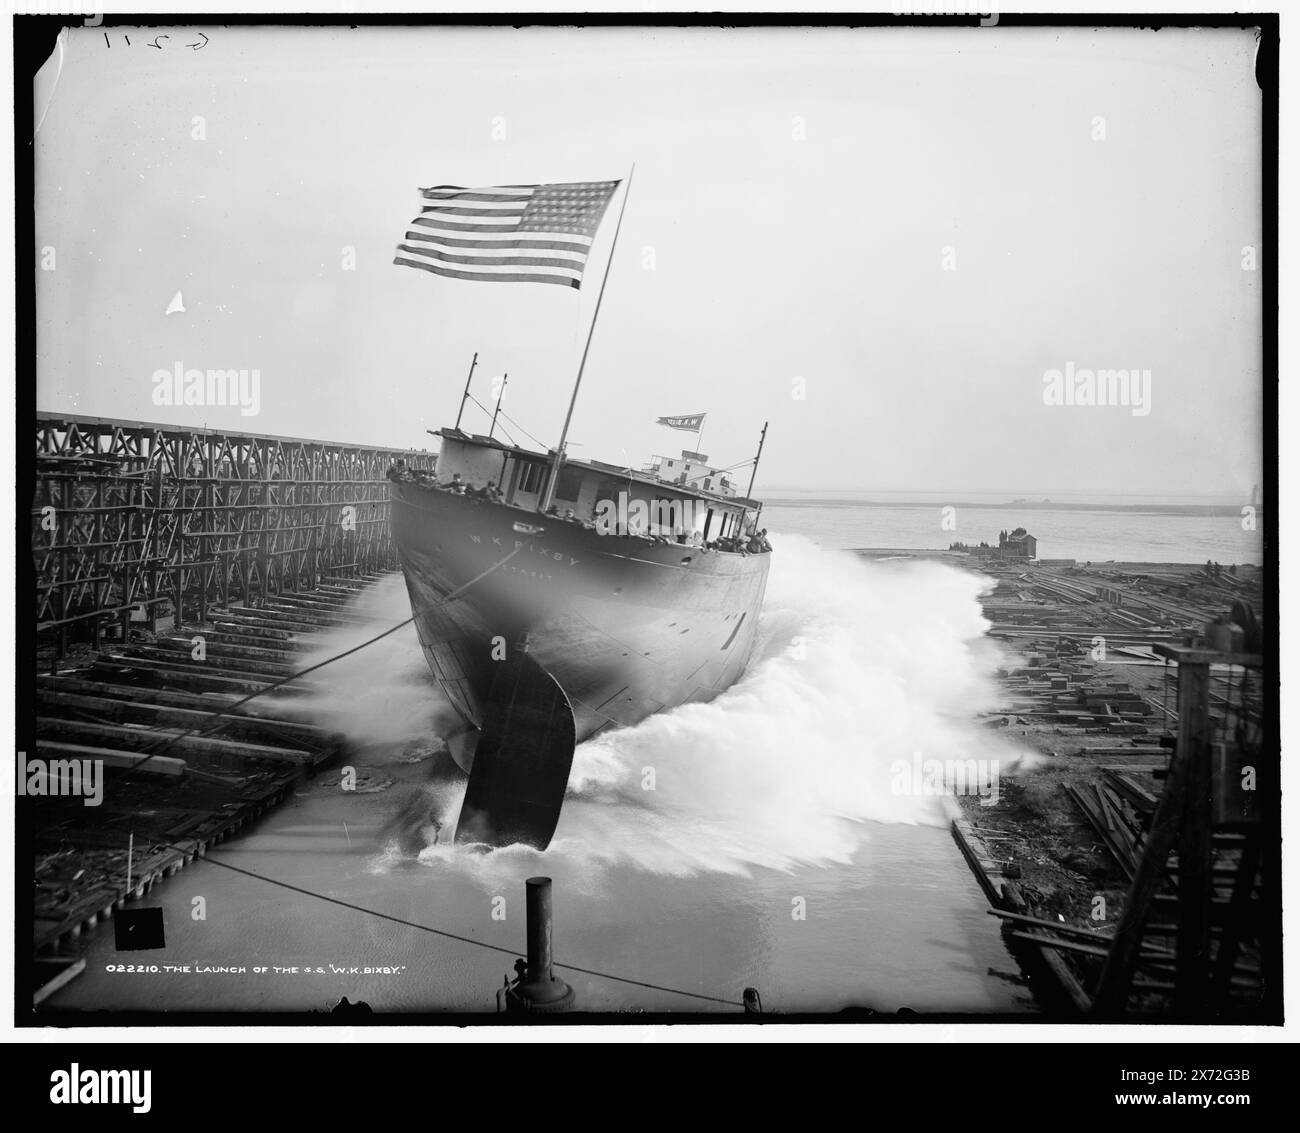 The Launch of the S.S. W.K. Bixby, 'G 211' on negative., Detroit Publishing Co. no. 022210., Gift; State Historical Society of Colorado; 1949,  W.K. Bixby (Freighter) , Cargo ships. , Launchings. , United States, Michigan, Wyandotte. Stock Photo